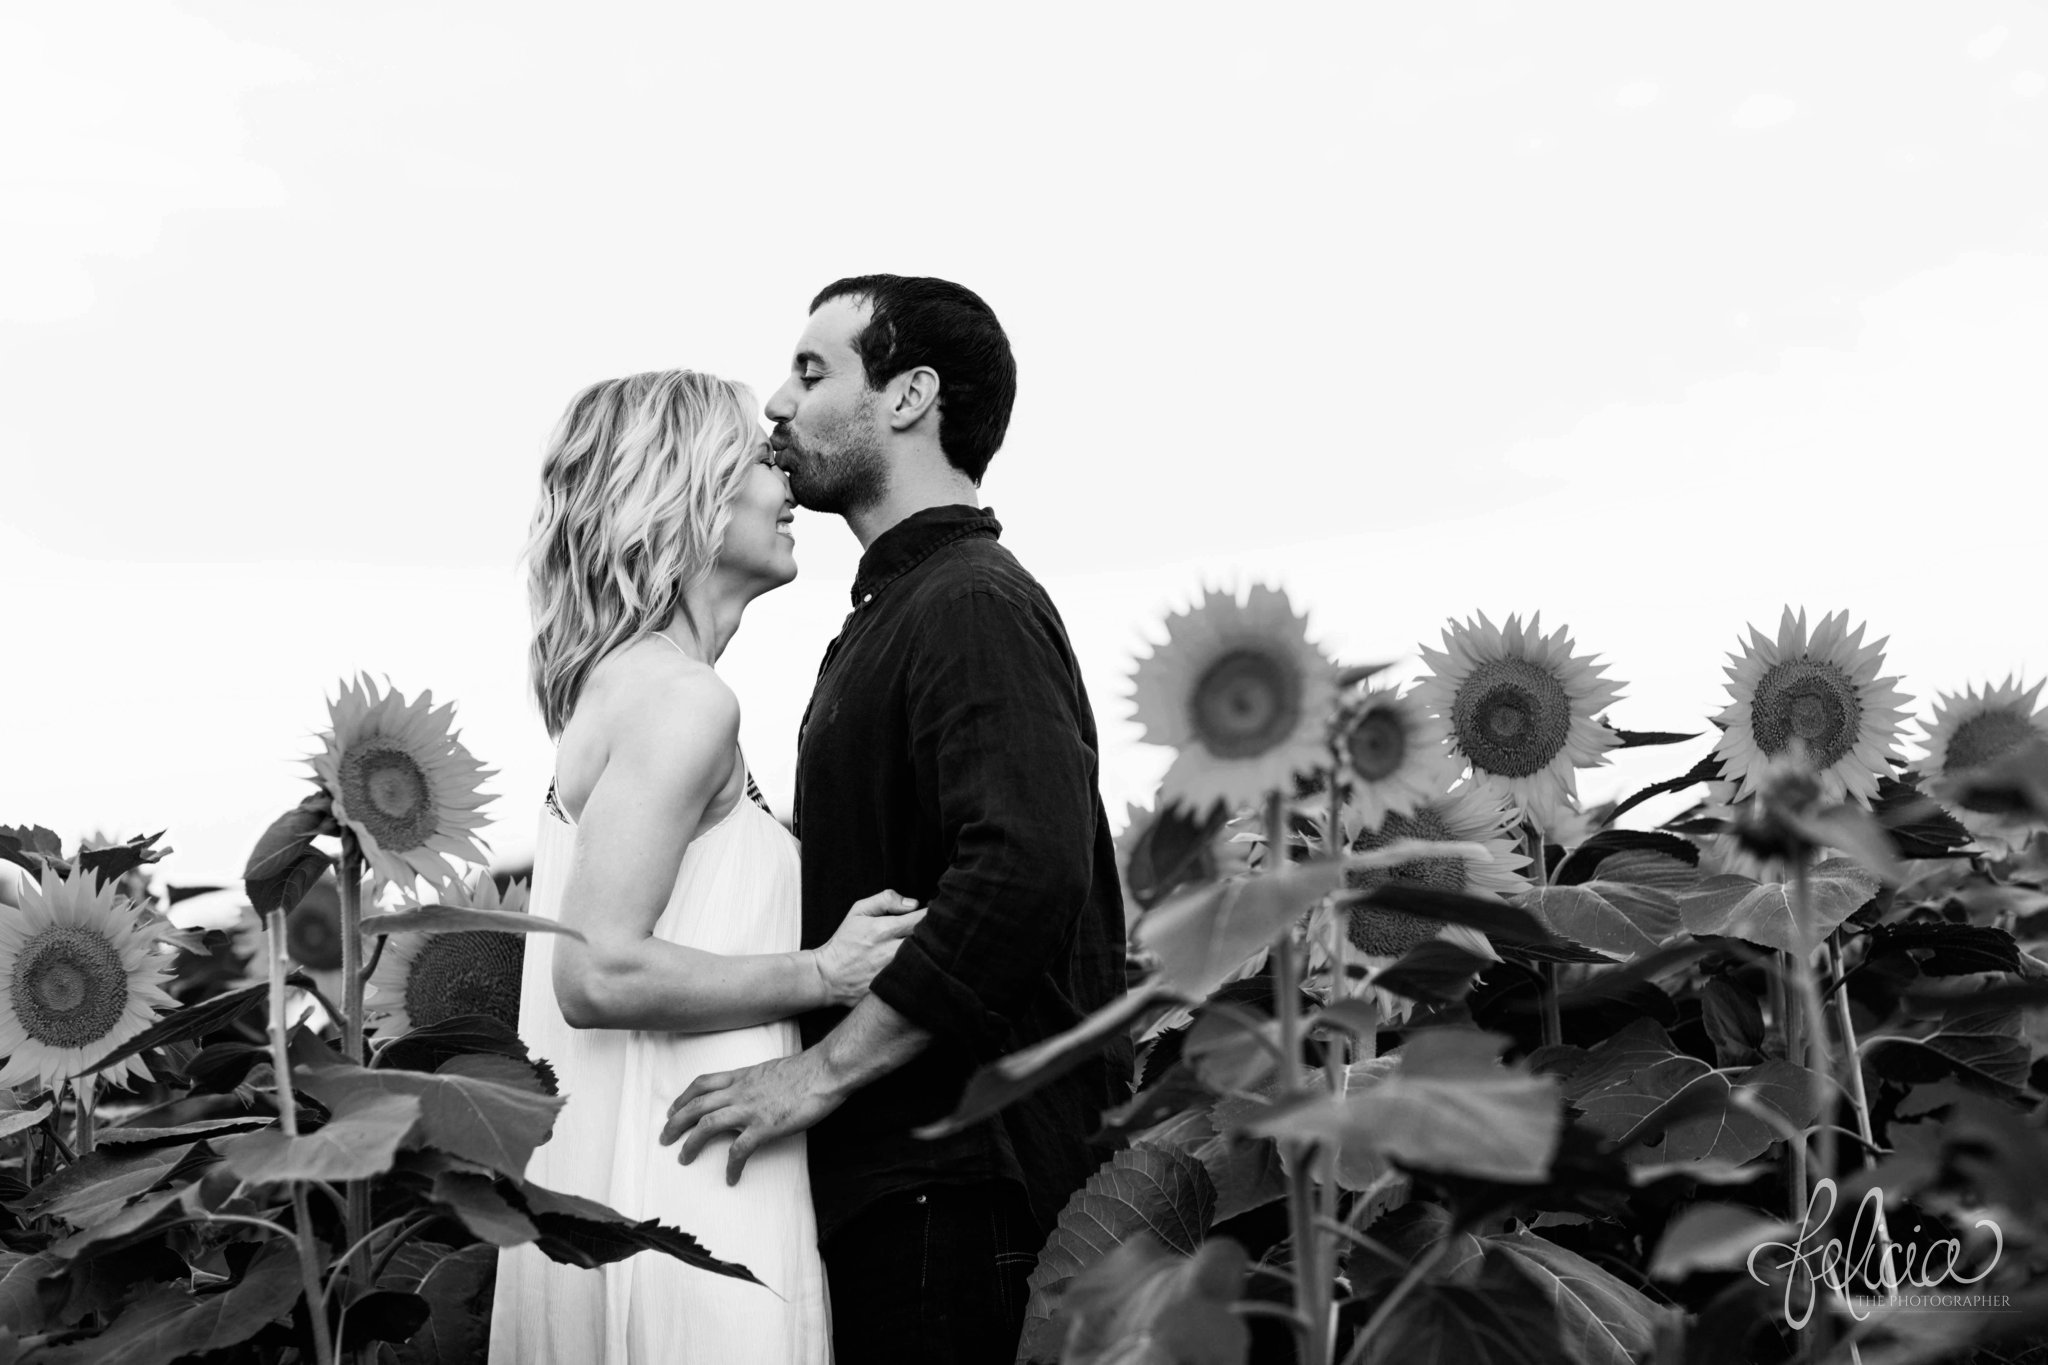 Sunrise Engagement Photos | Felicia The Photographer | Sunflower field | forehead kiss | Black and White | Laughing